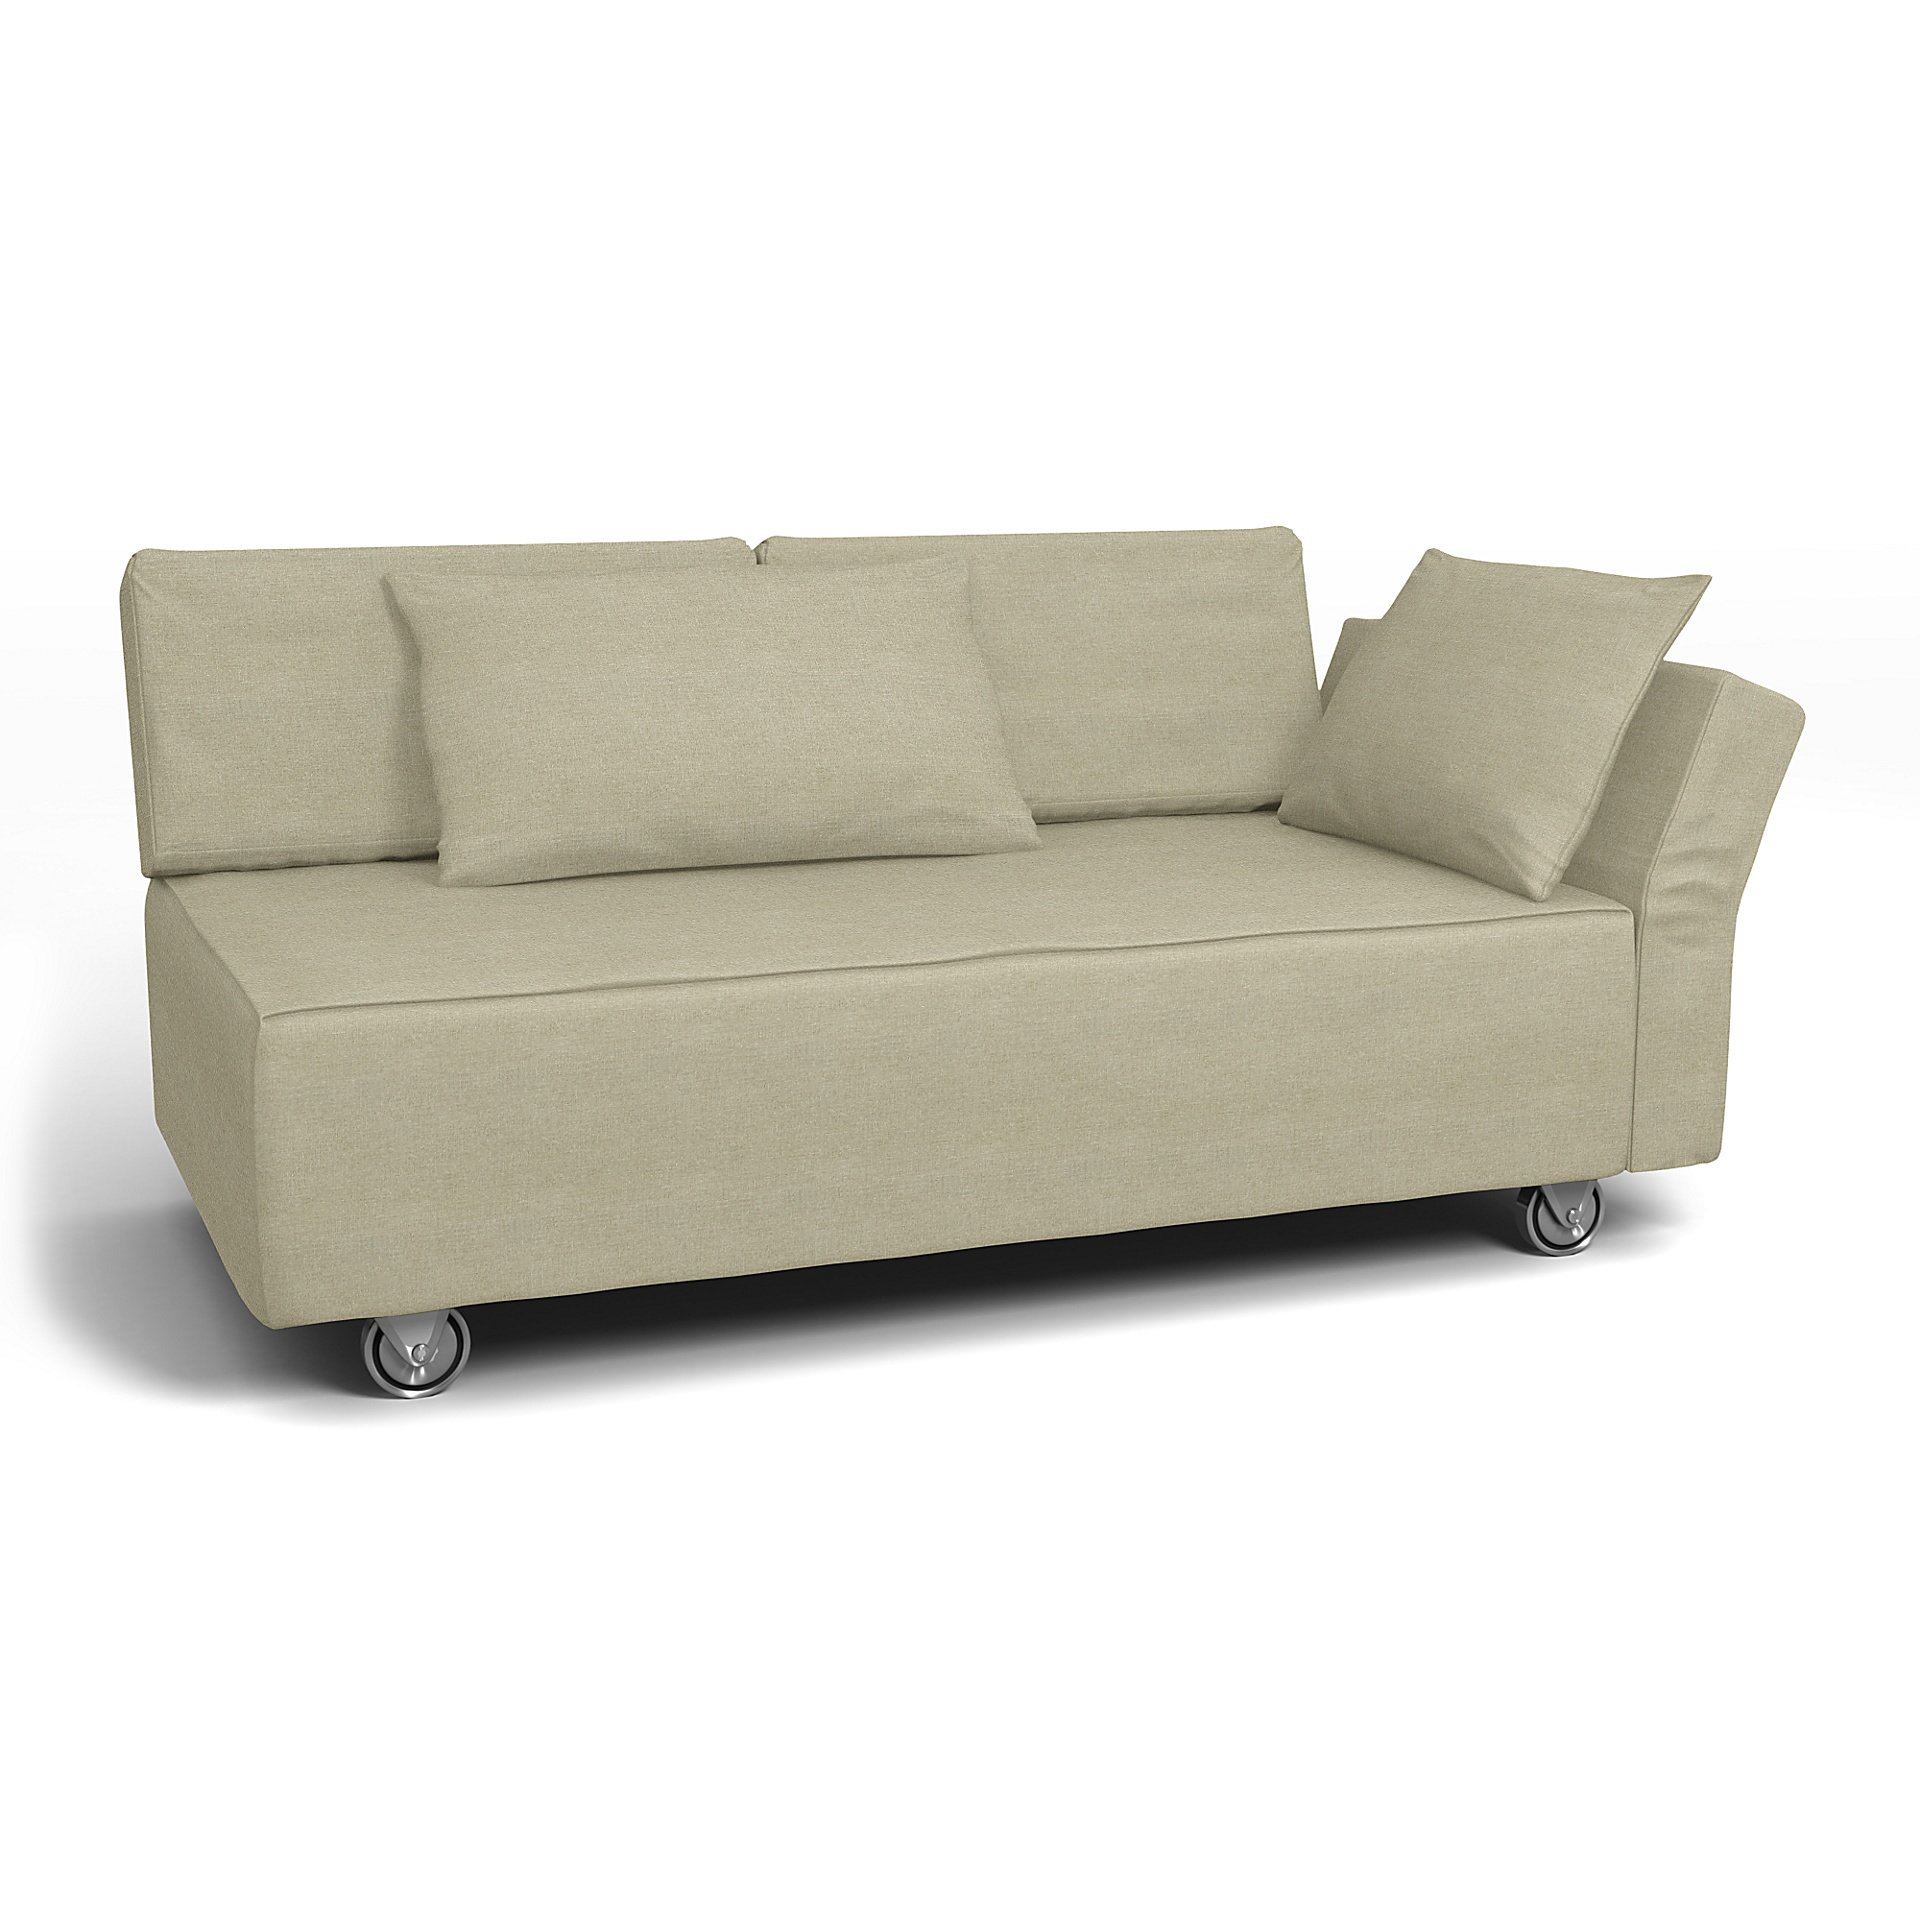 IKEA - Falsterbo 2 Seat Sofa with Right Arm Cover, Pebble, Linen - Bemz